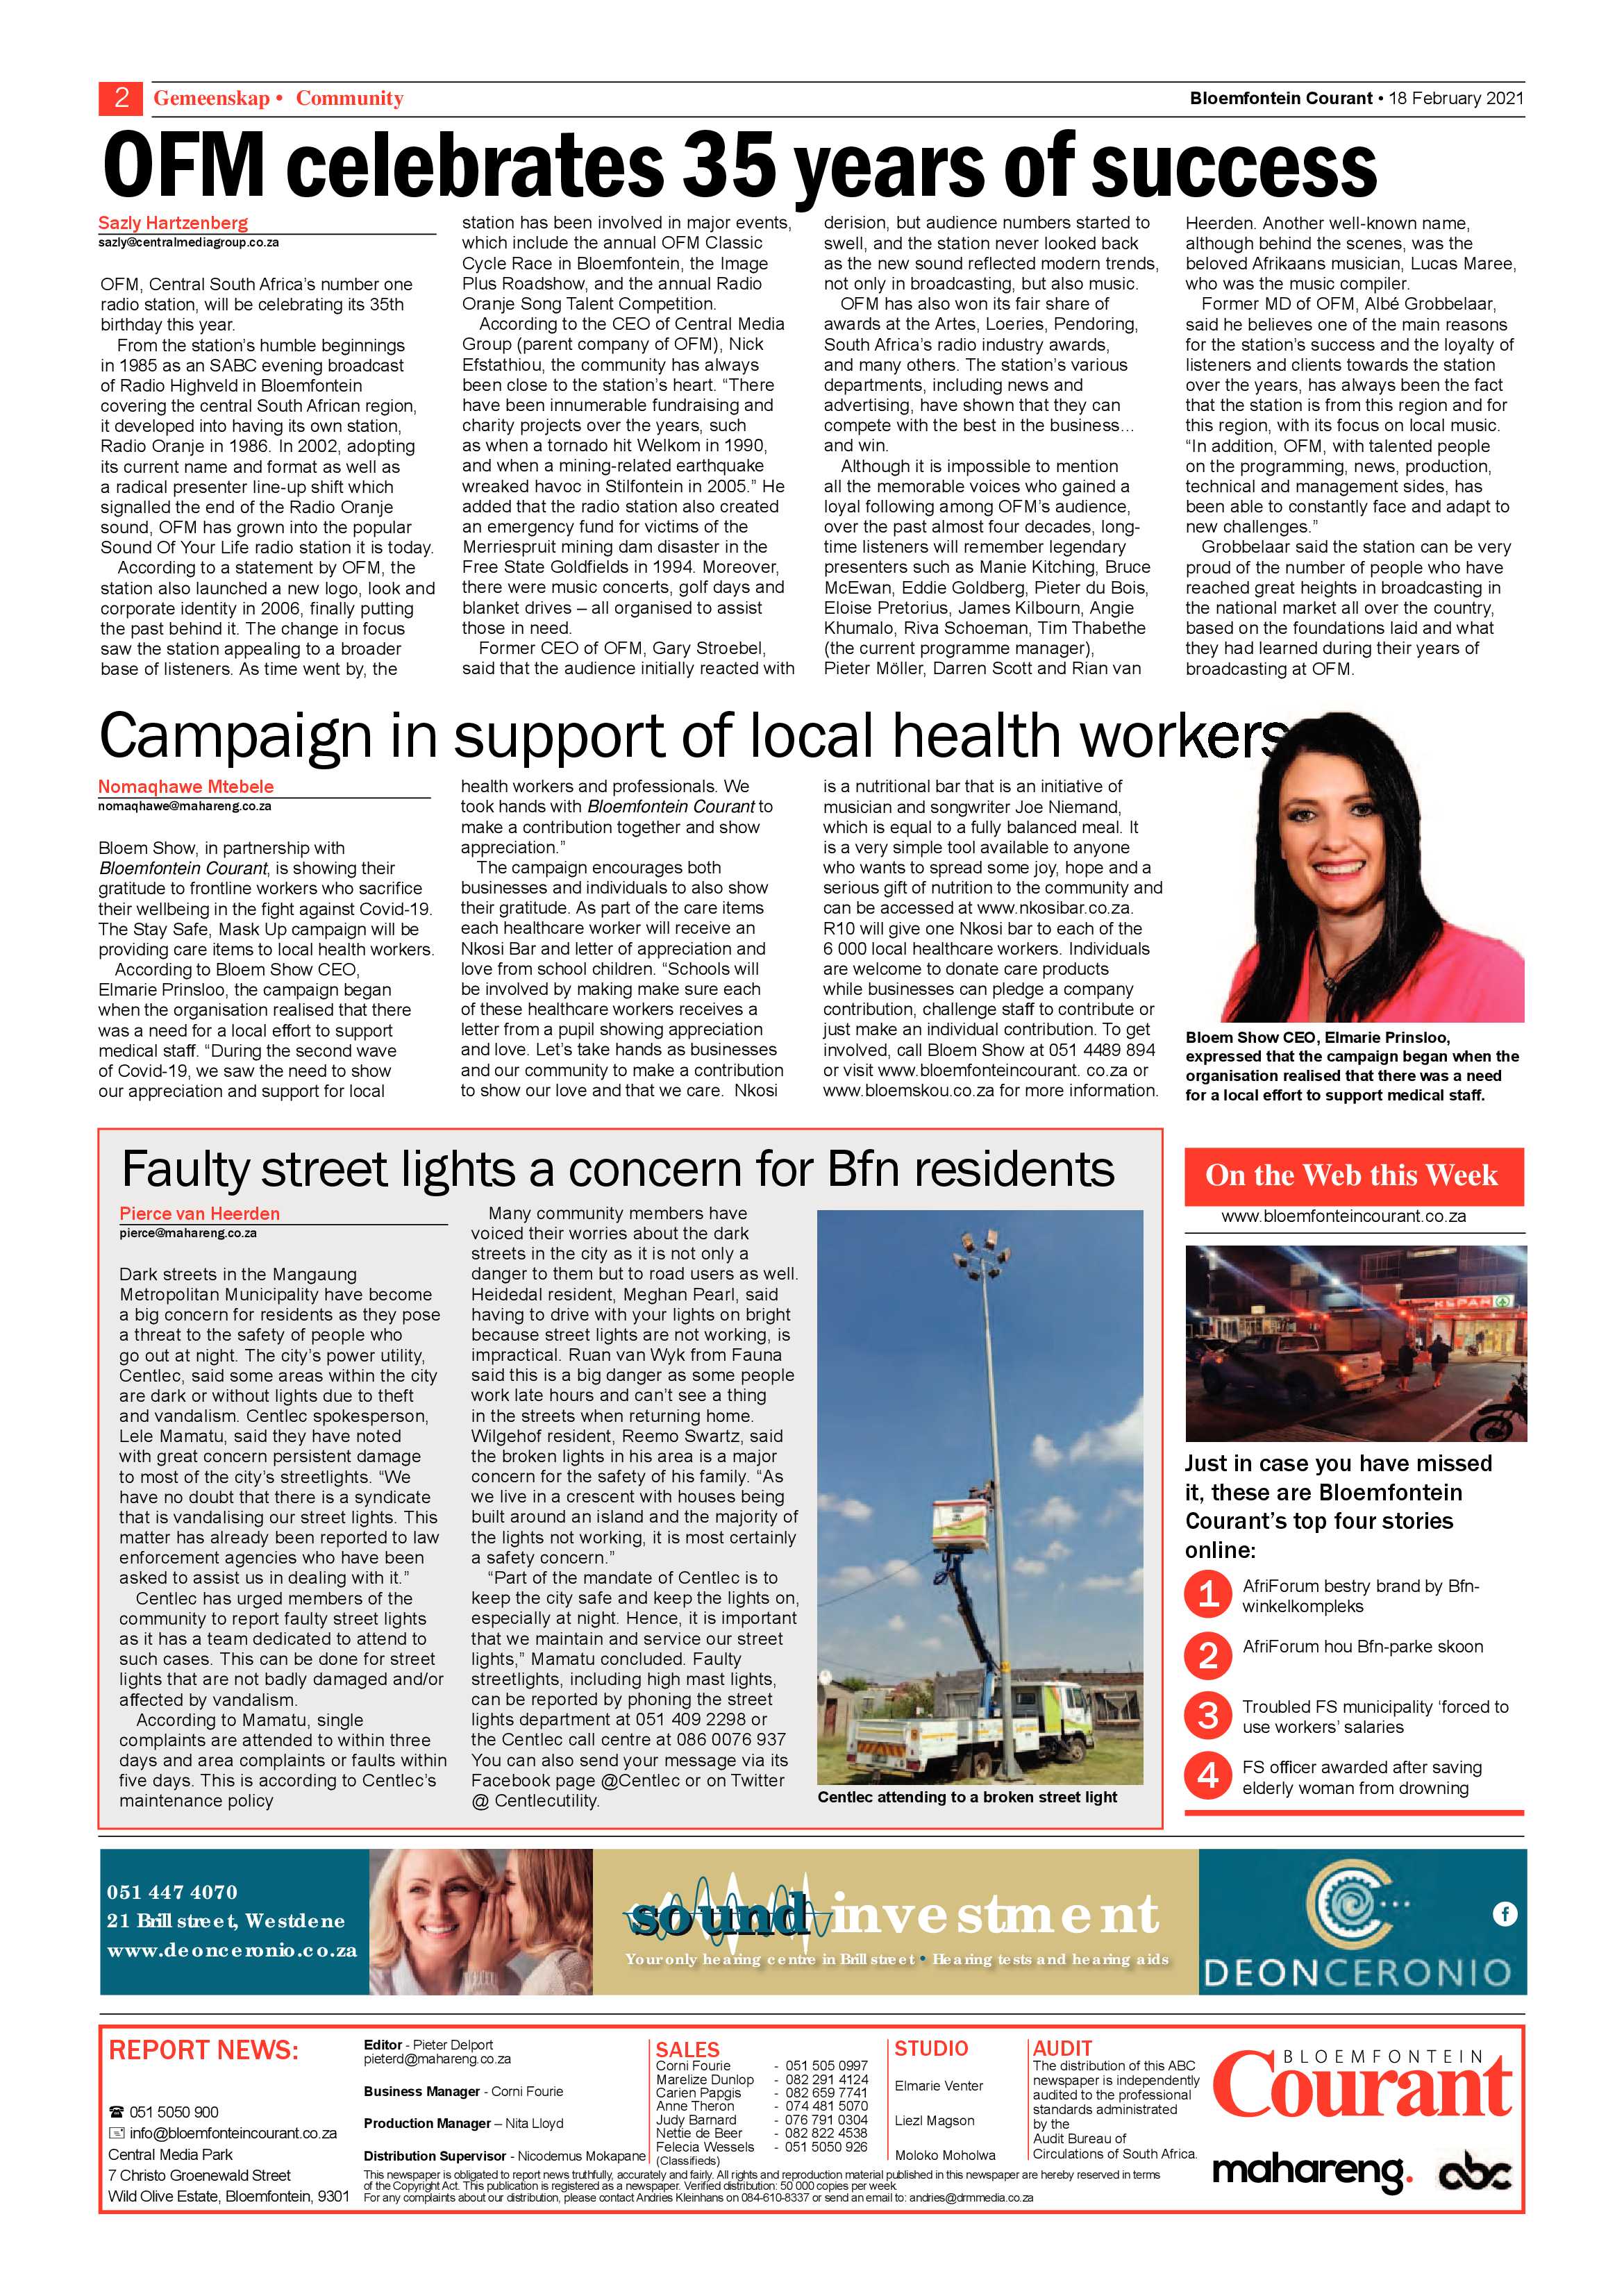 bloemfontein-courant-18-february-2021-epapers-page-2